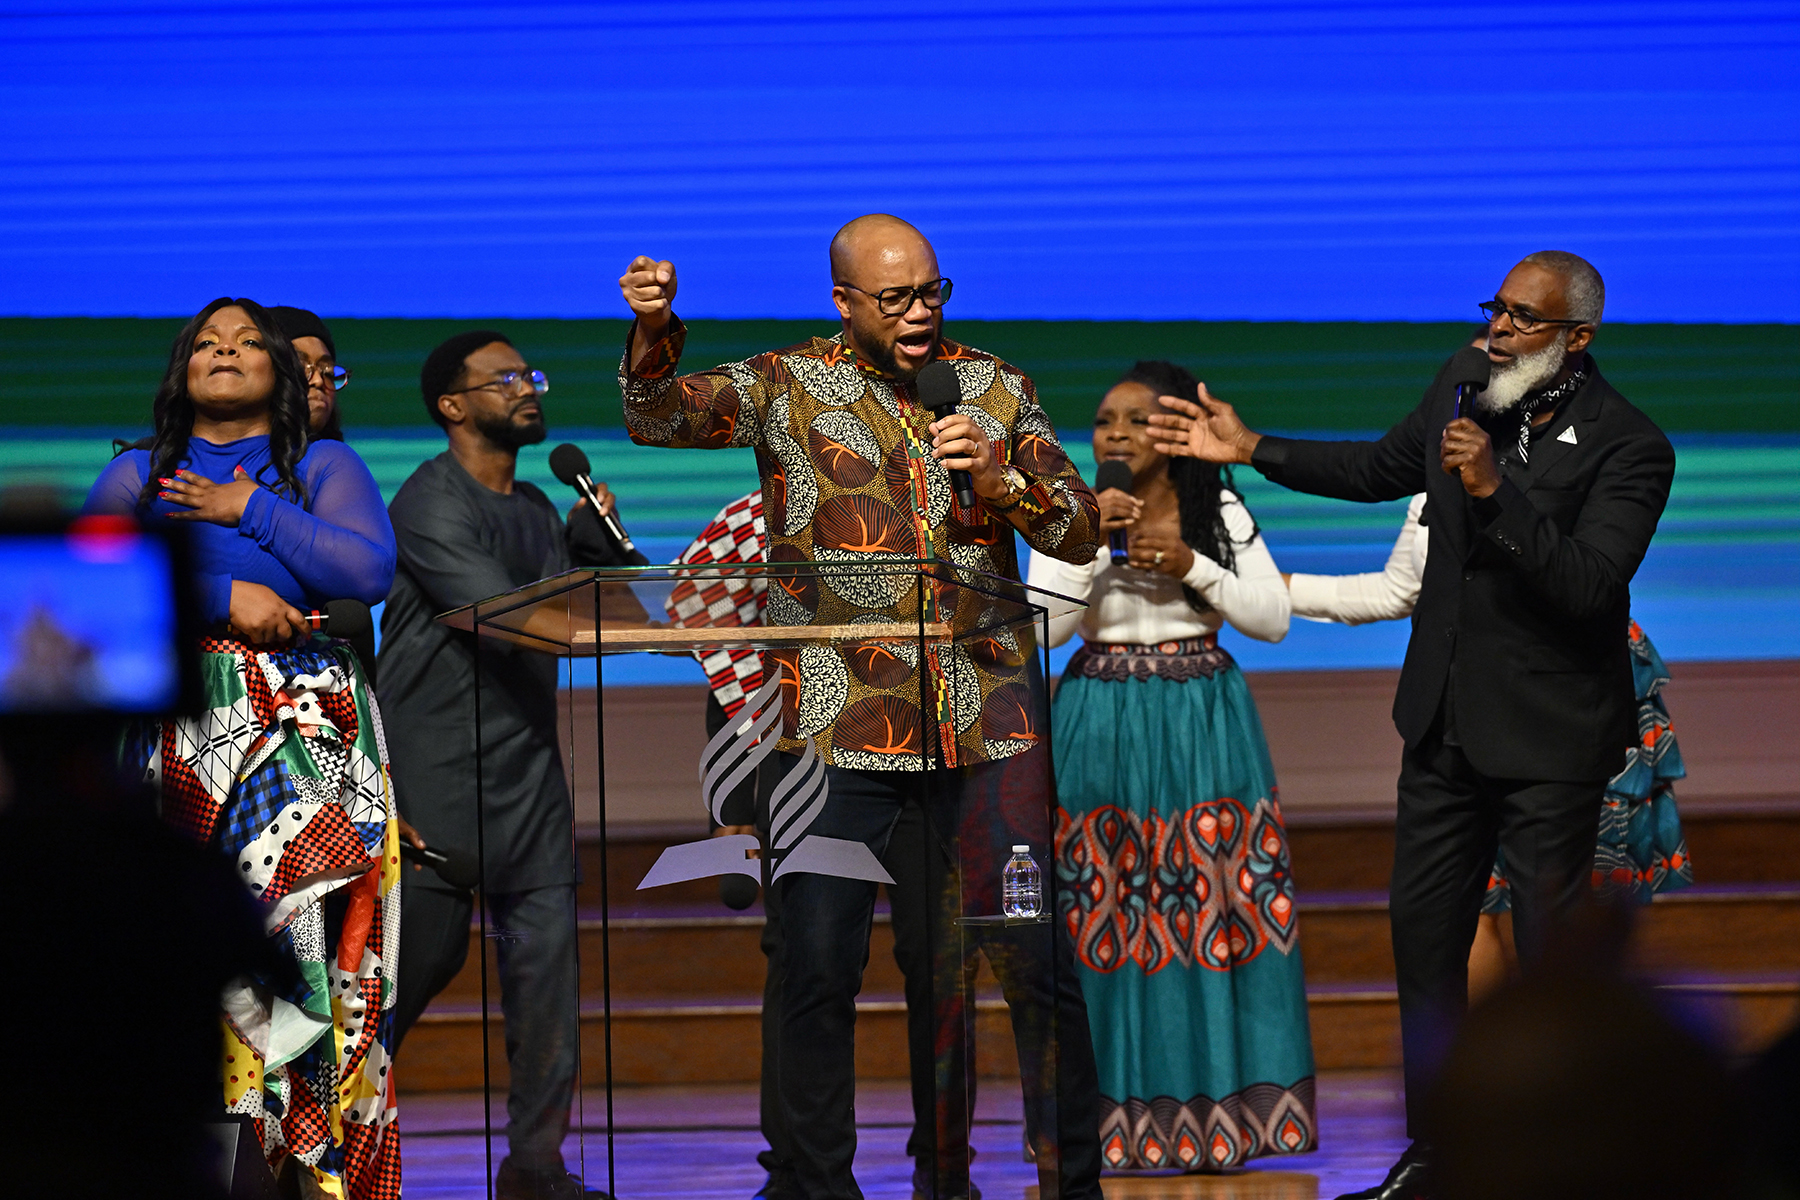 A Black praise and worship team on stage, wearing African outfits and singing passionately. The leader is in the middle. 